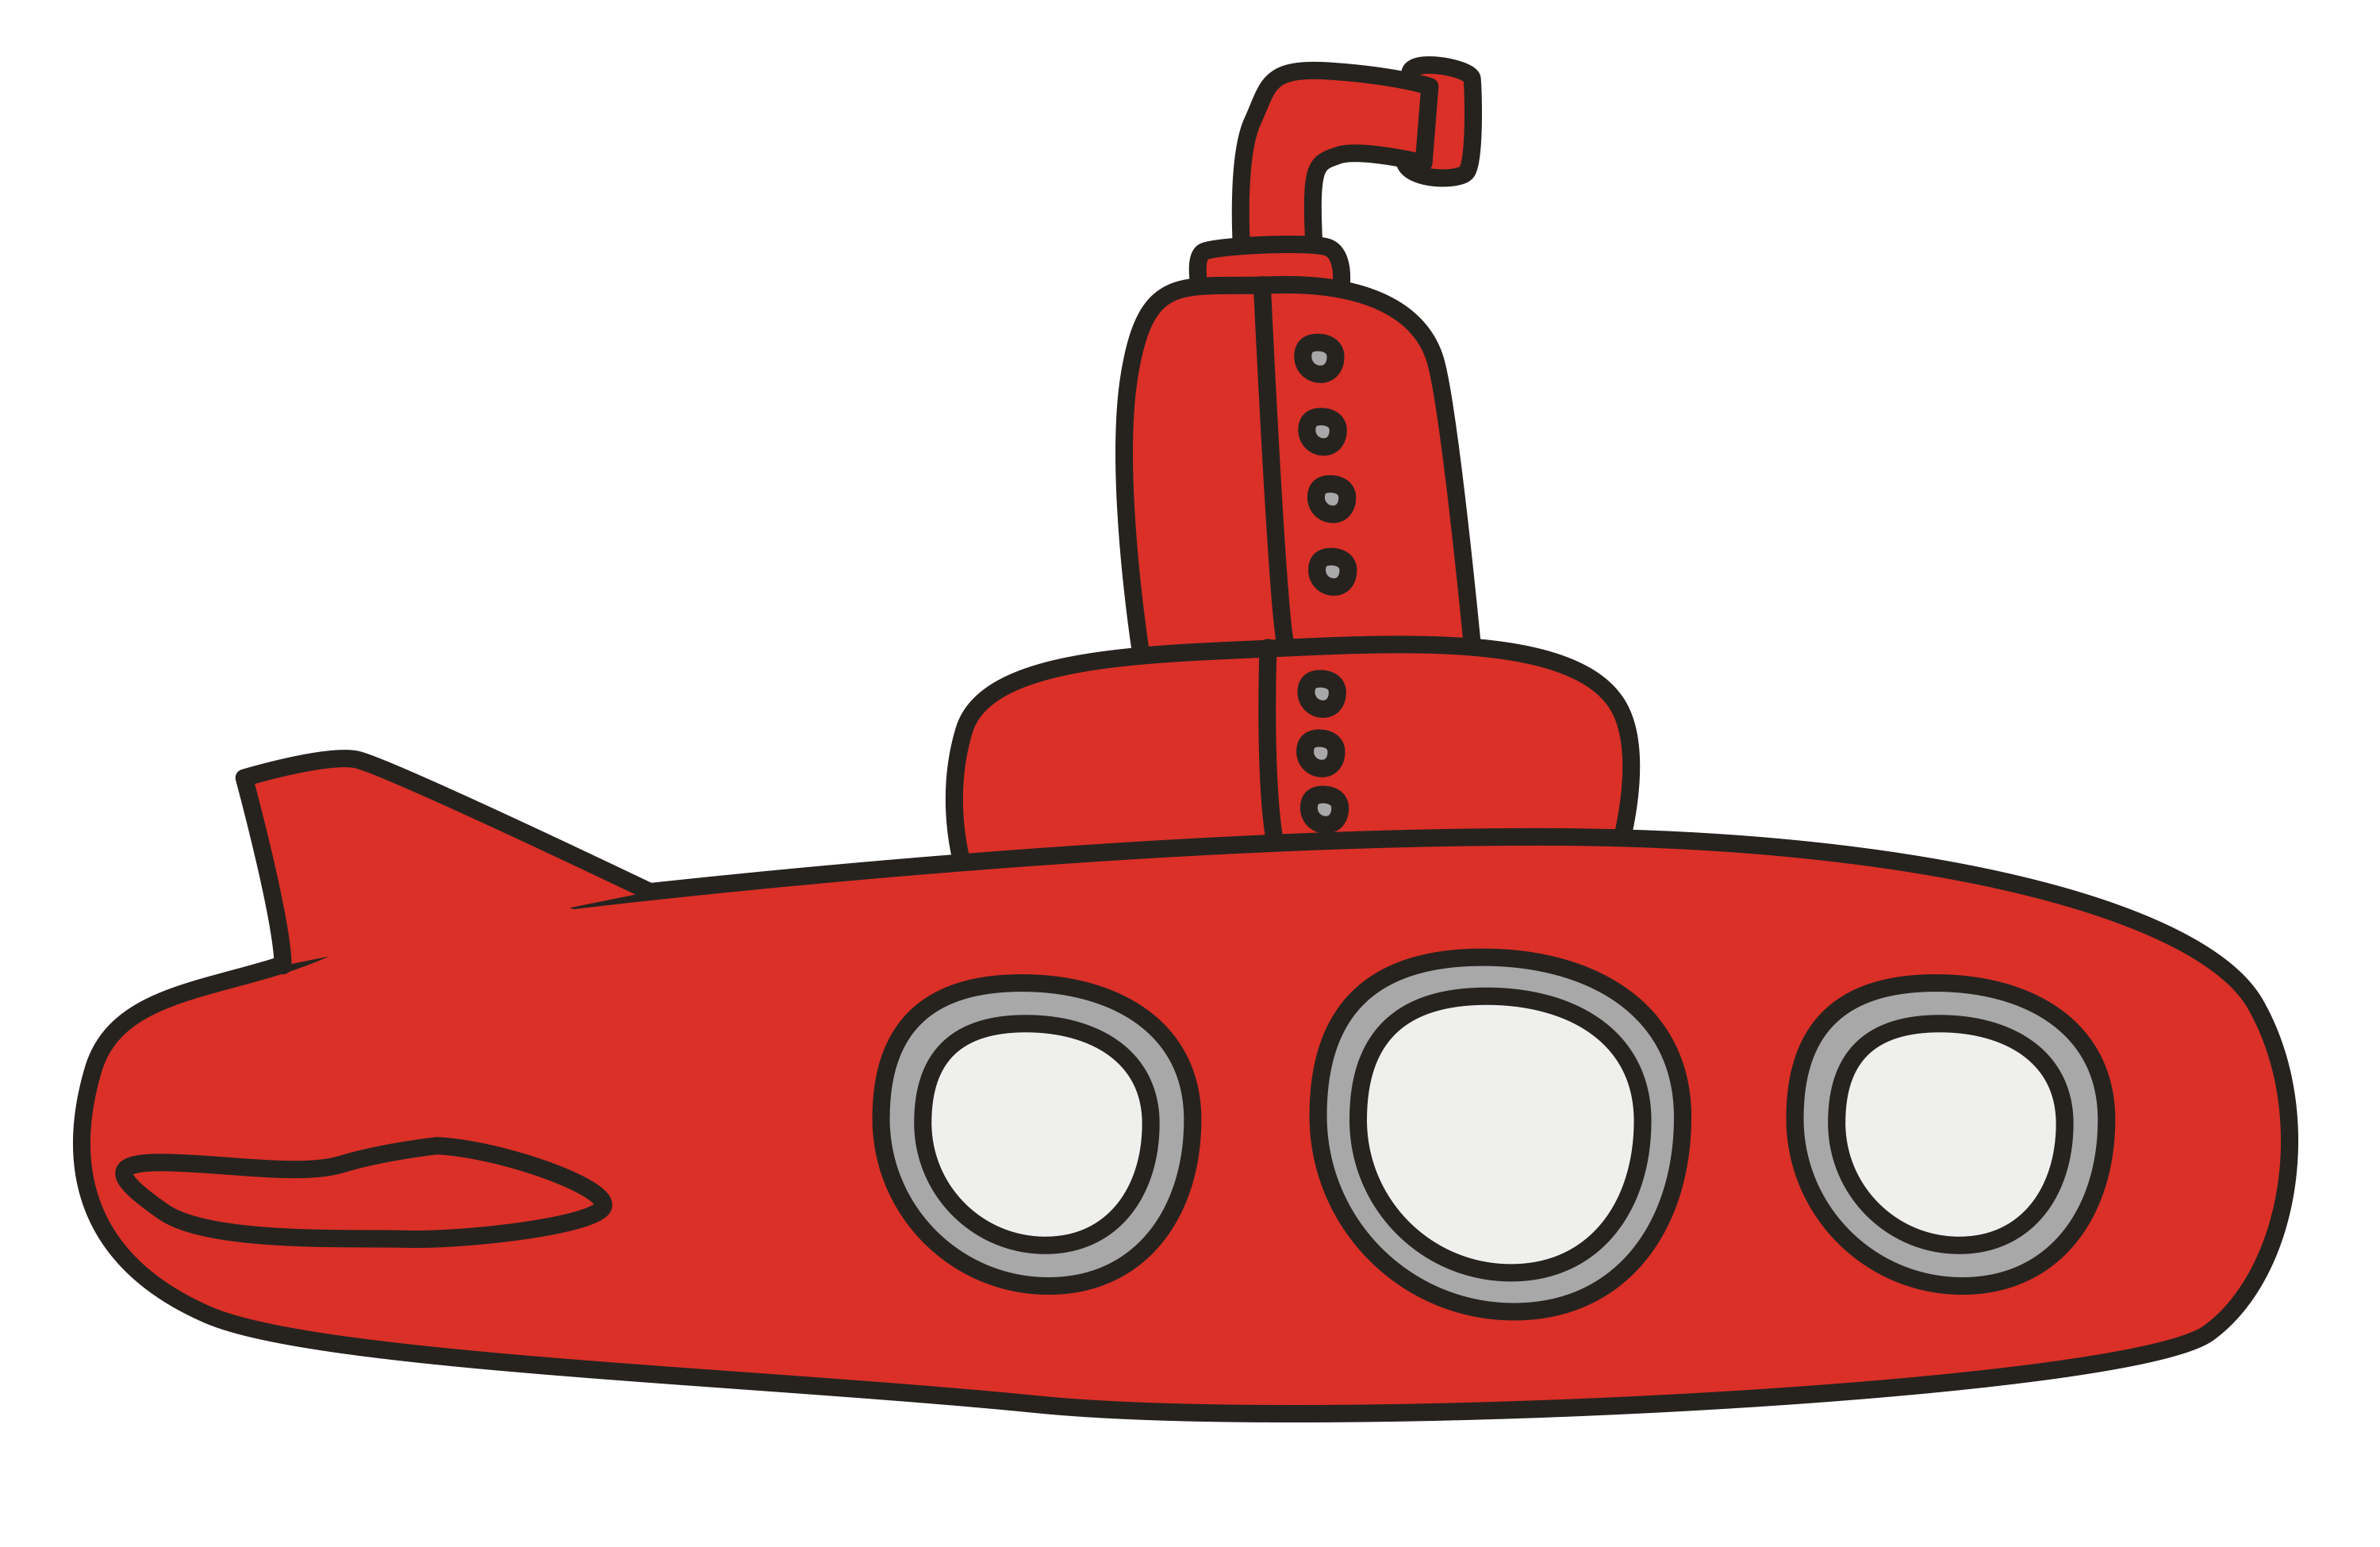 Submarine clipart red. Maths simpsons fish and